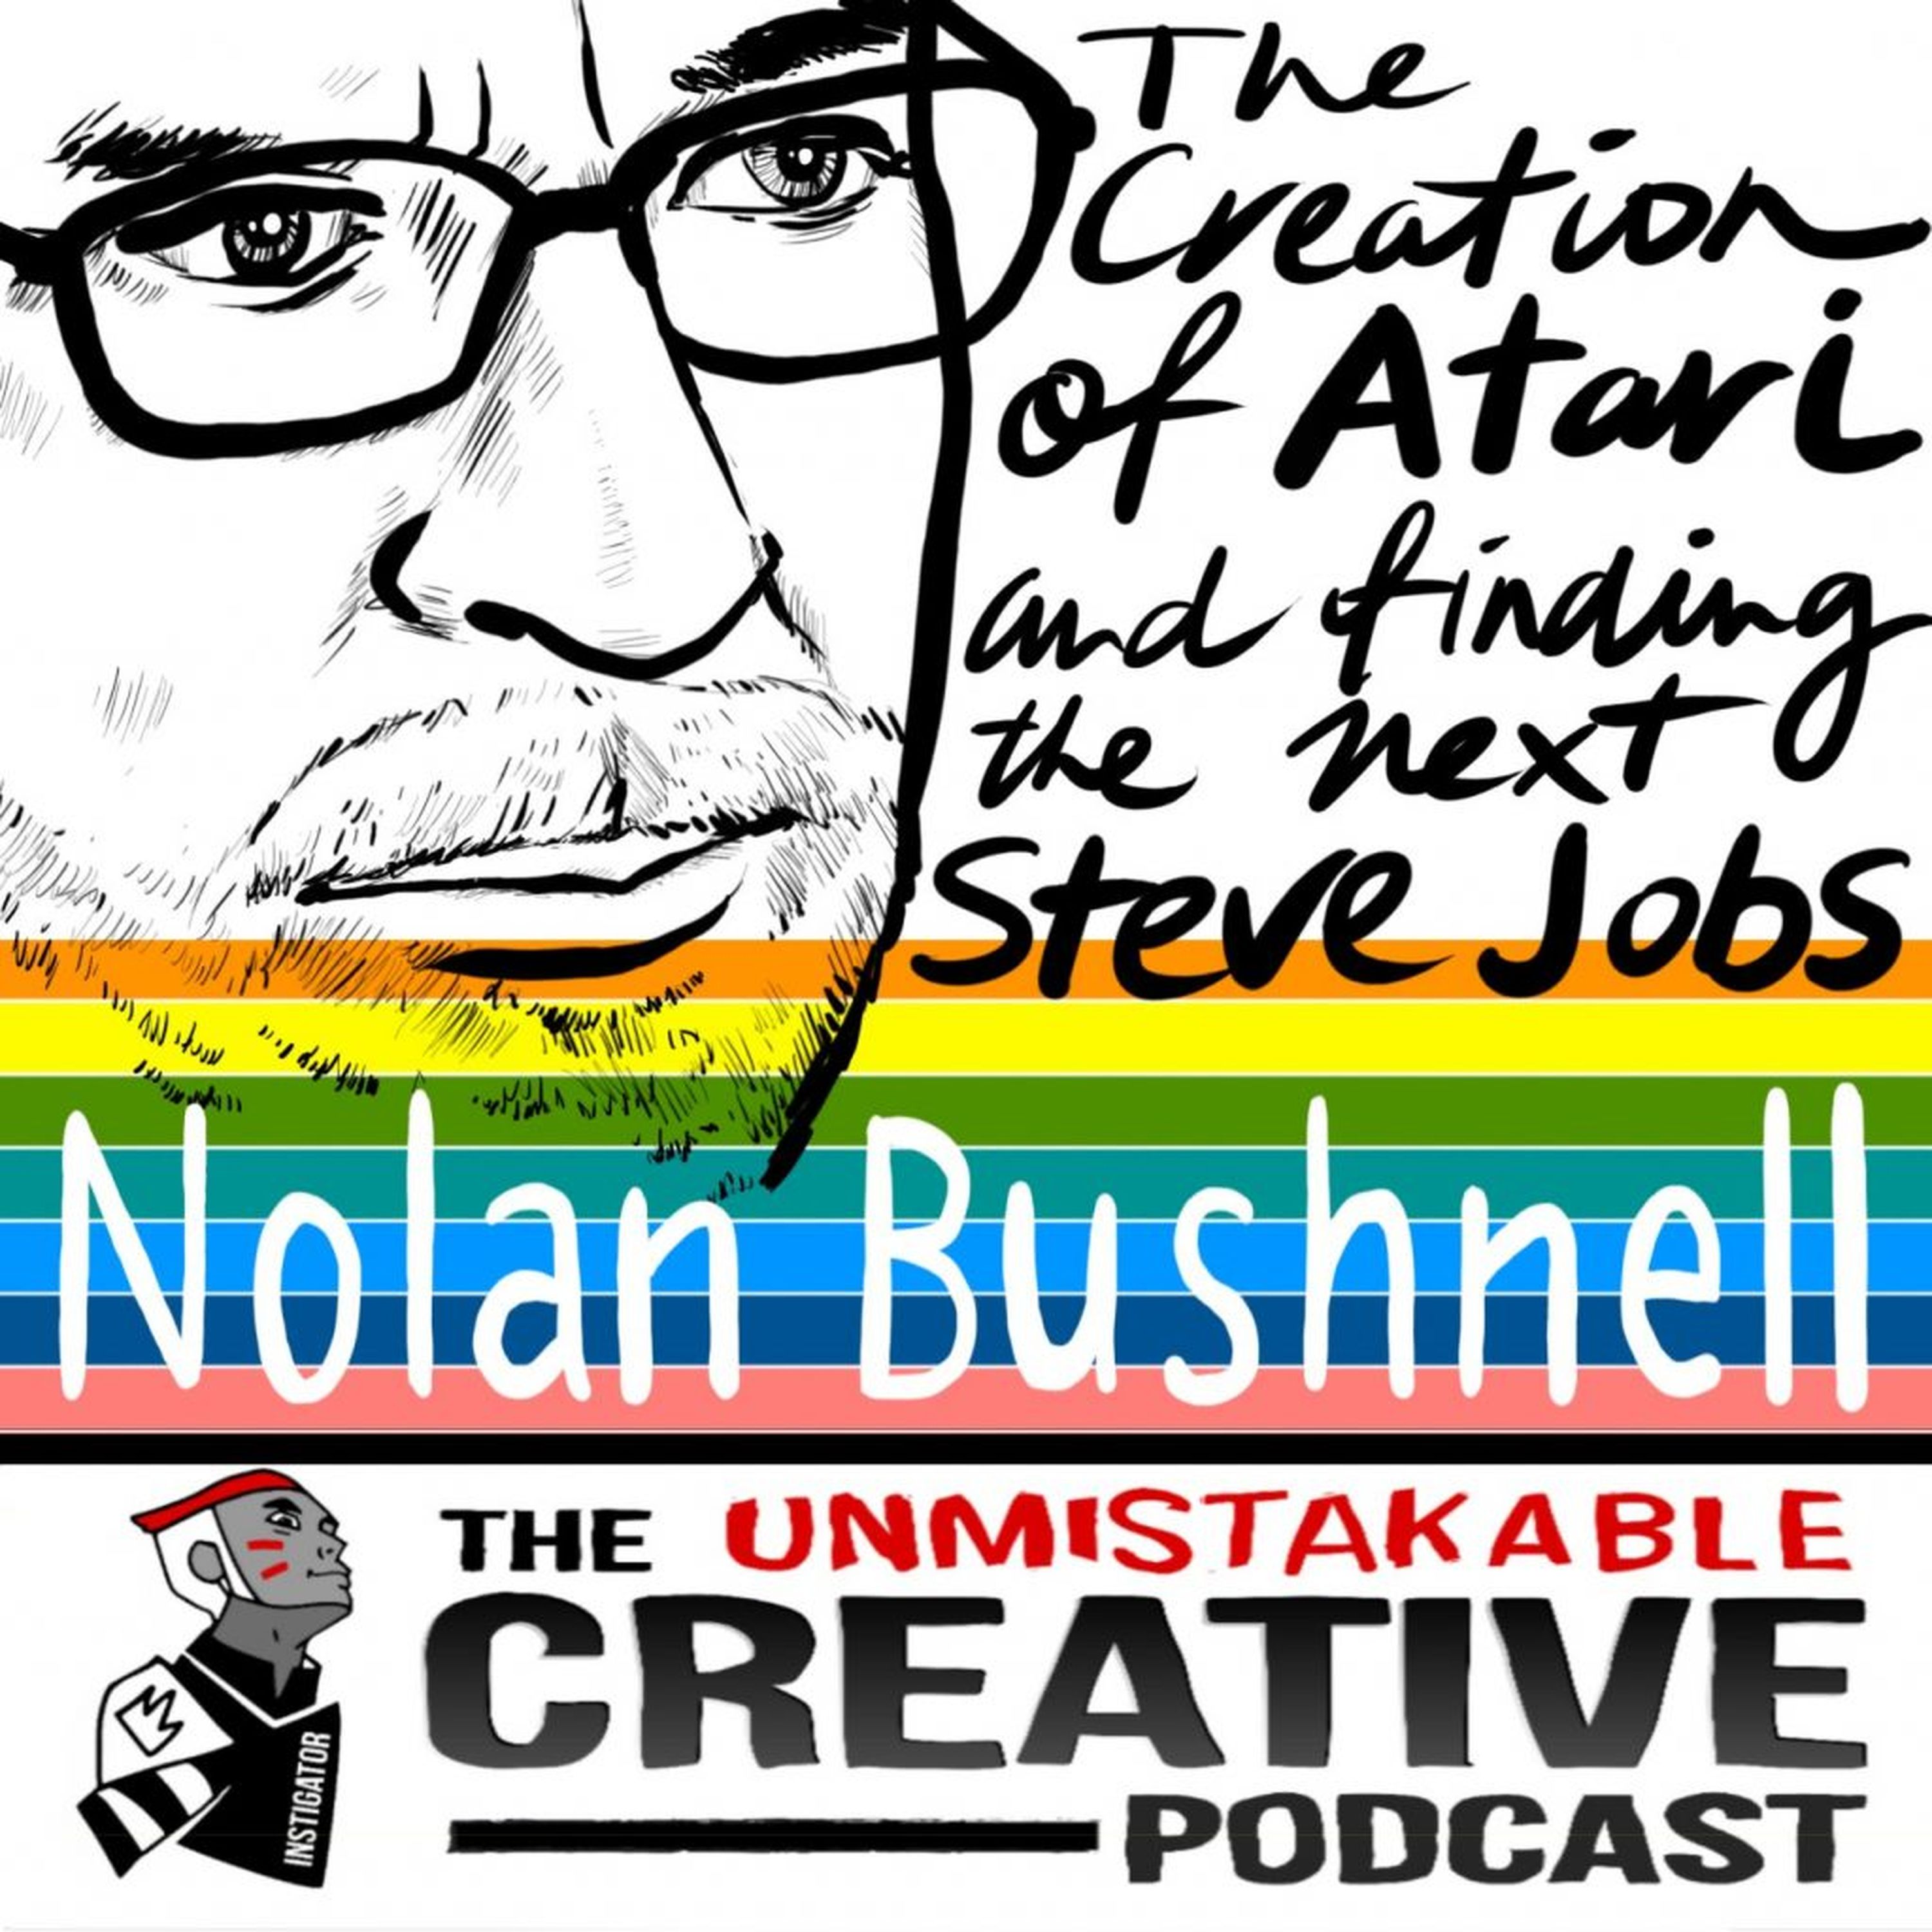 Best Of: The Creation of Atari and Finding The Next Steve Jobs with Nolan Bushnell